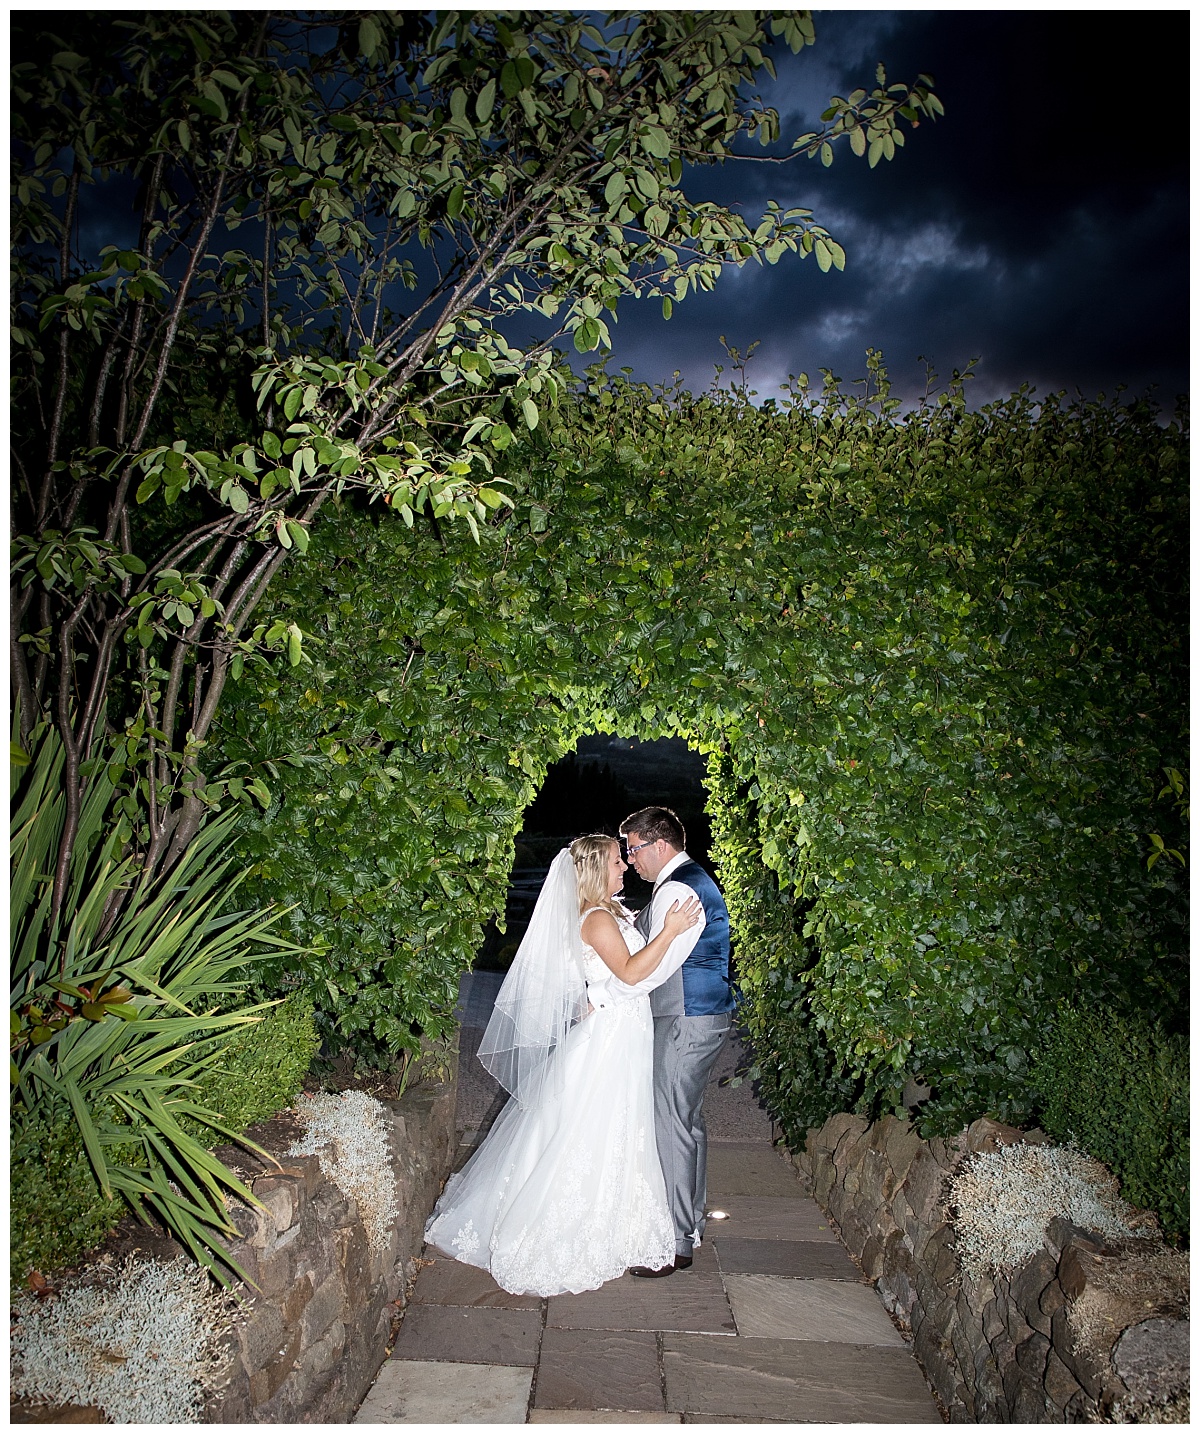 Wedding Photography Manchester - Lisa and James's The Three Horseshoes Country Inn wedding 55